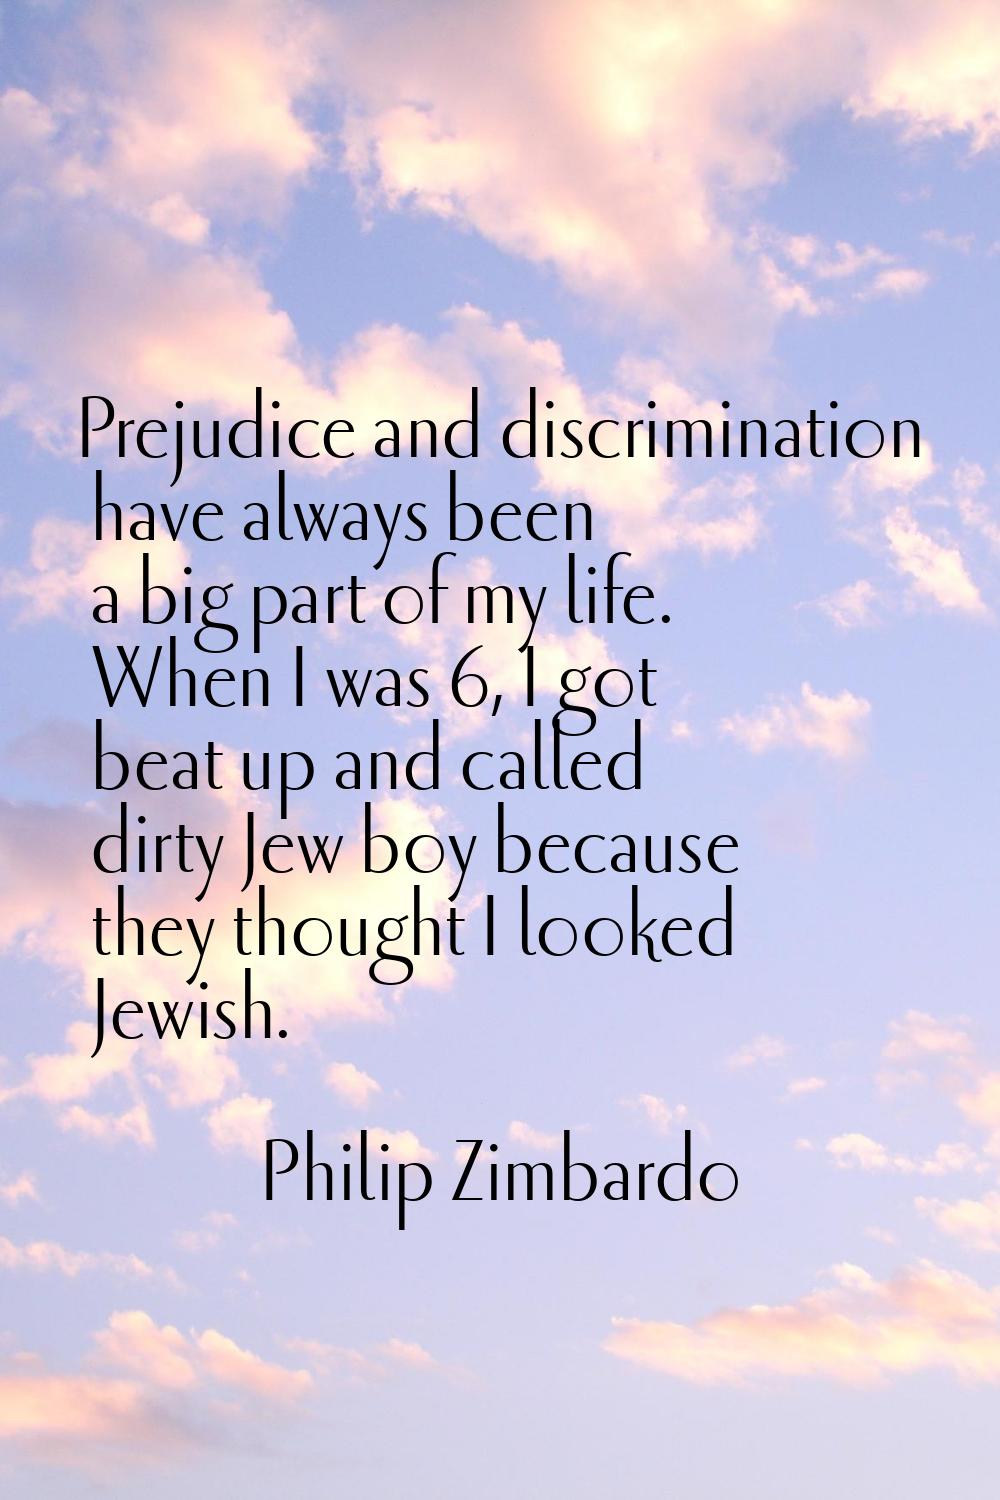 Prejudice and discrimination have always been a big part of my life. When I was 6, I got beat up an